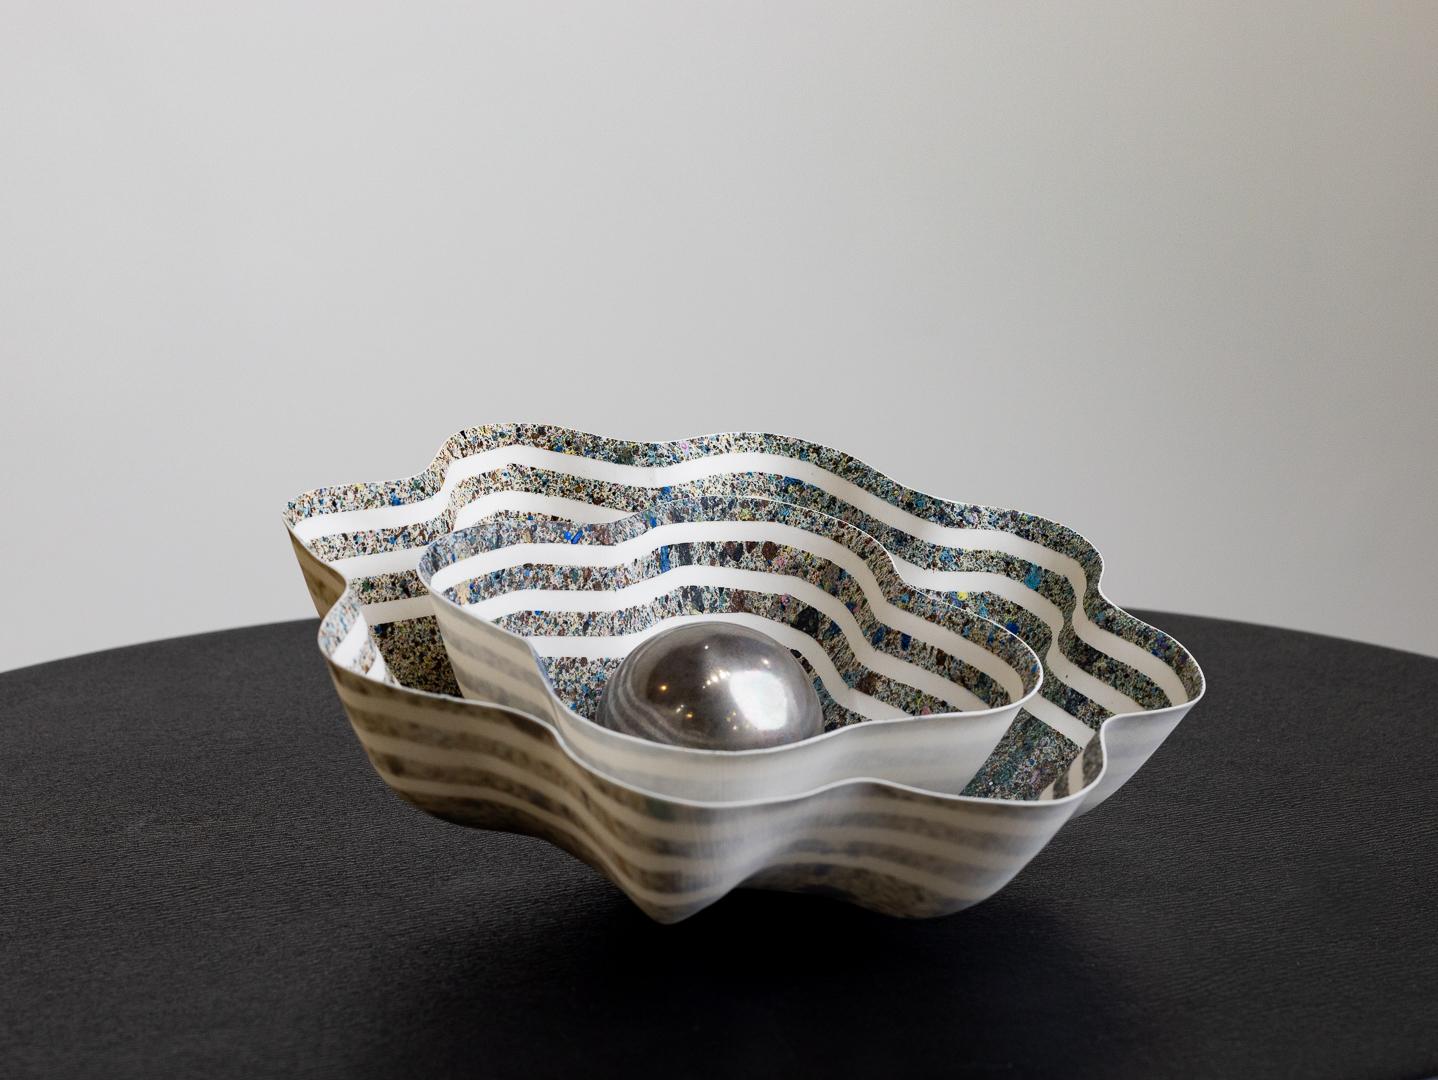 "Dark Days Ahead" Sculpture Permanent Nested Bowls of Striped & Fluted Porcelain